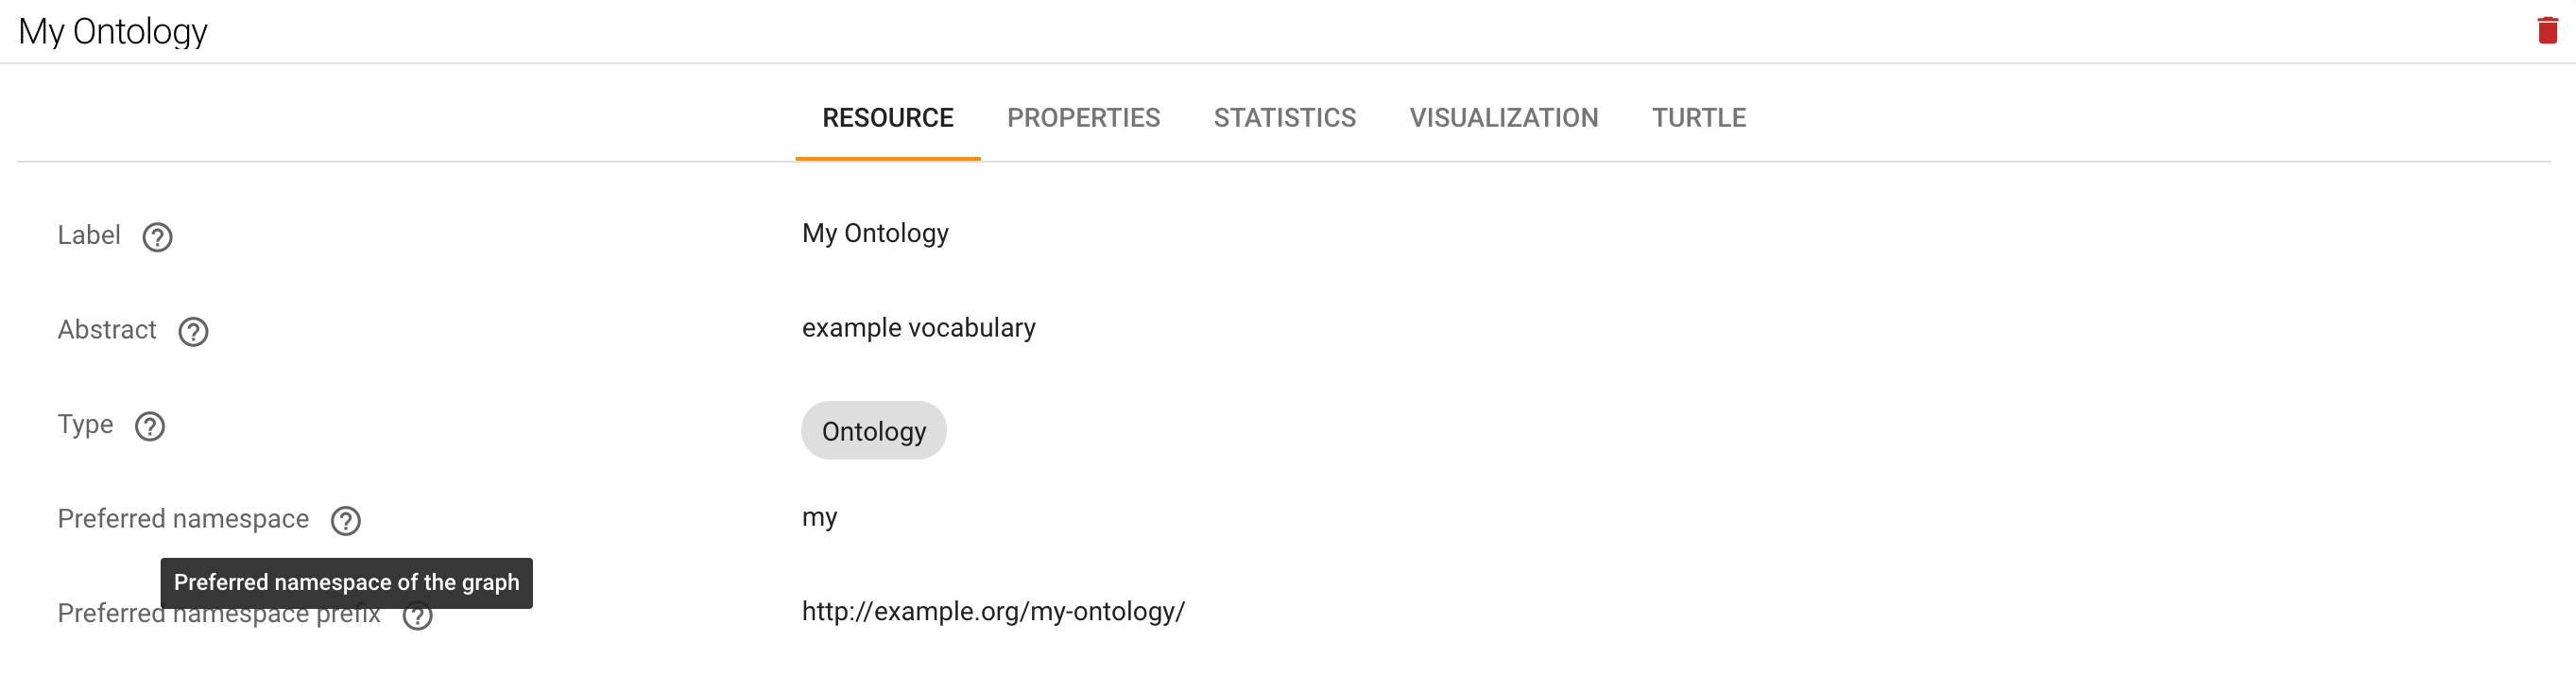 An ontology (graph) resource in the EXPLORE > Knowledge Graphs view